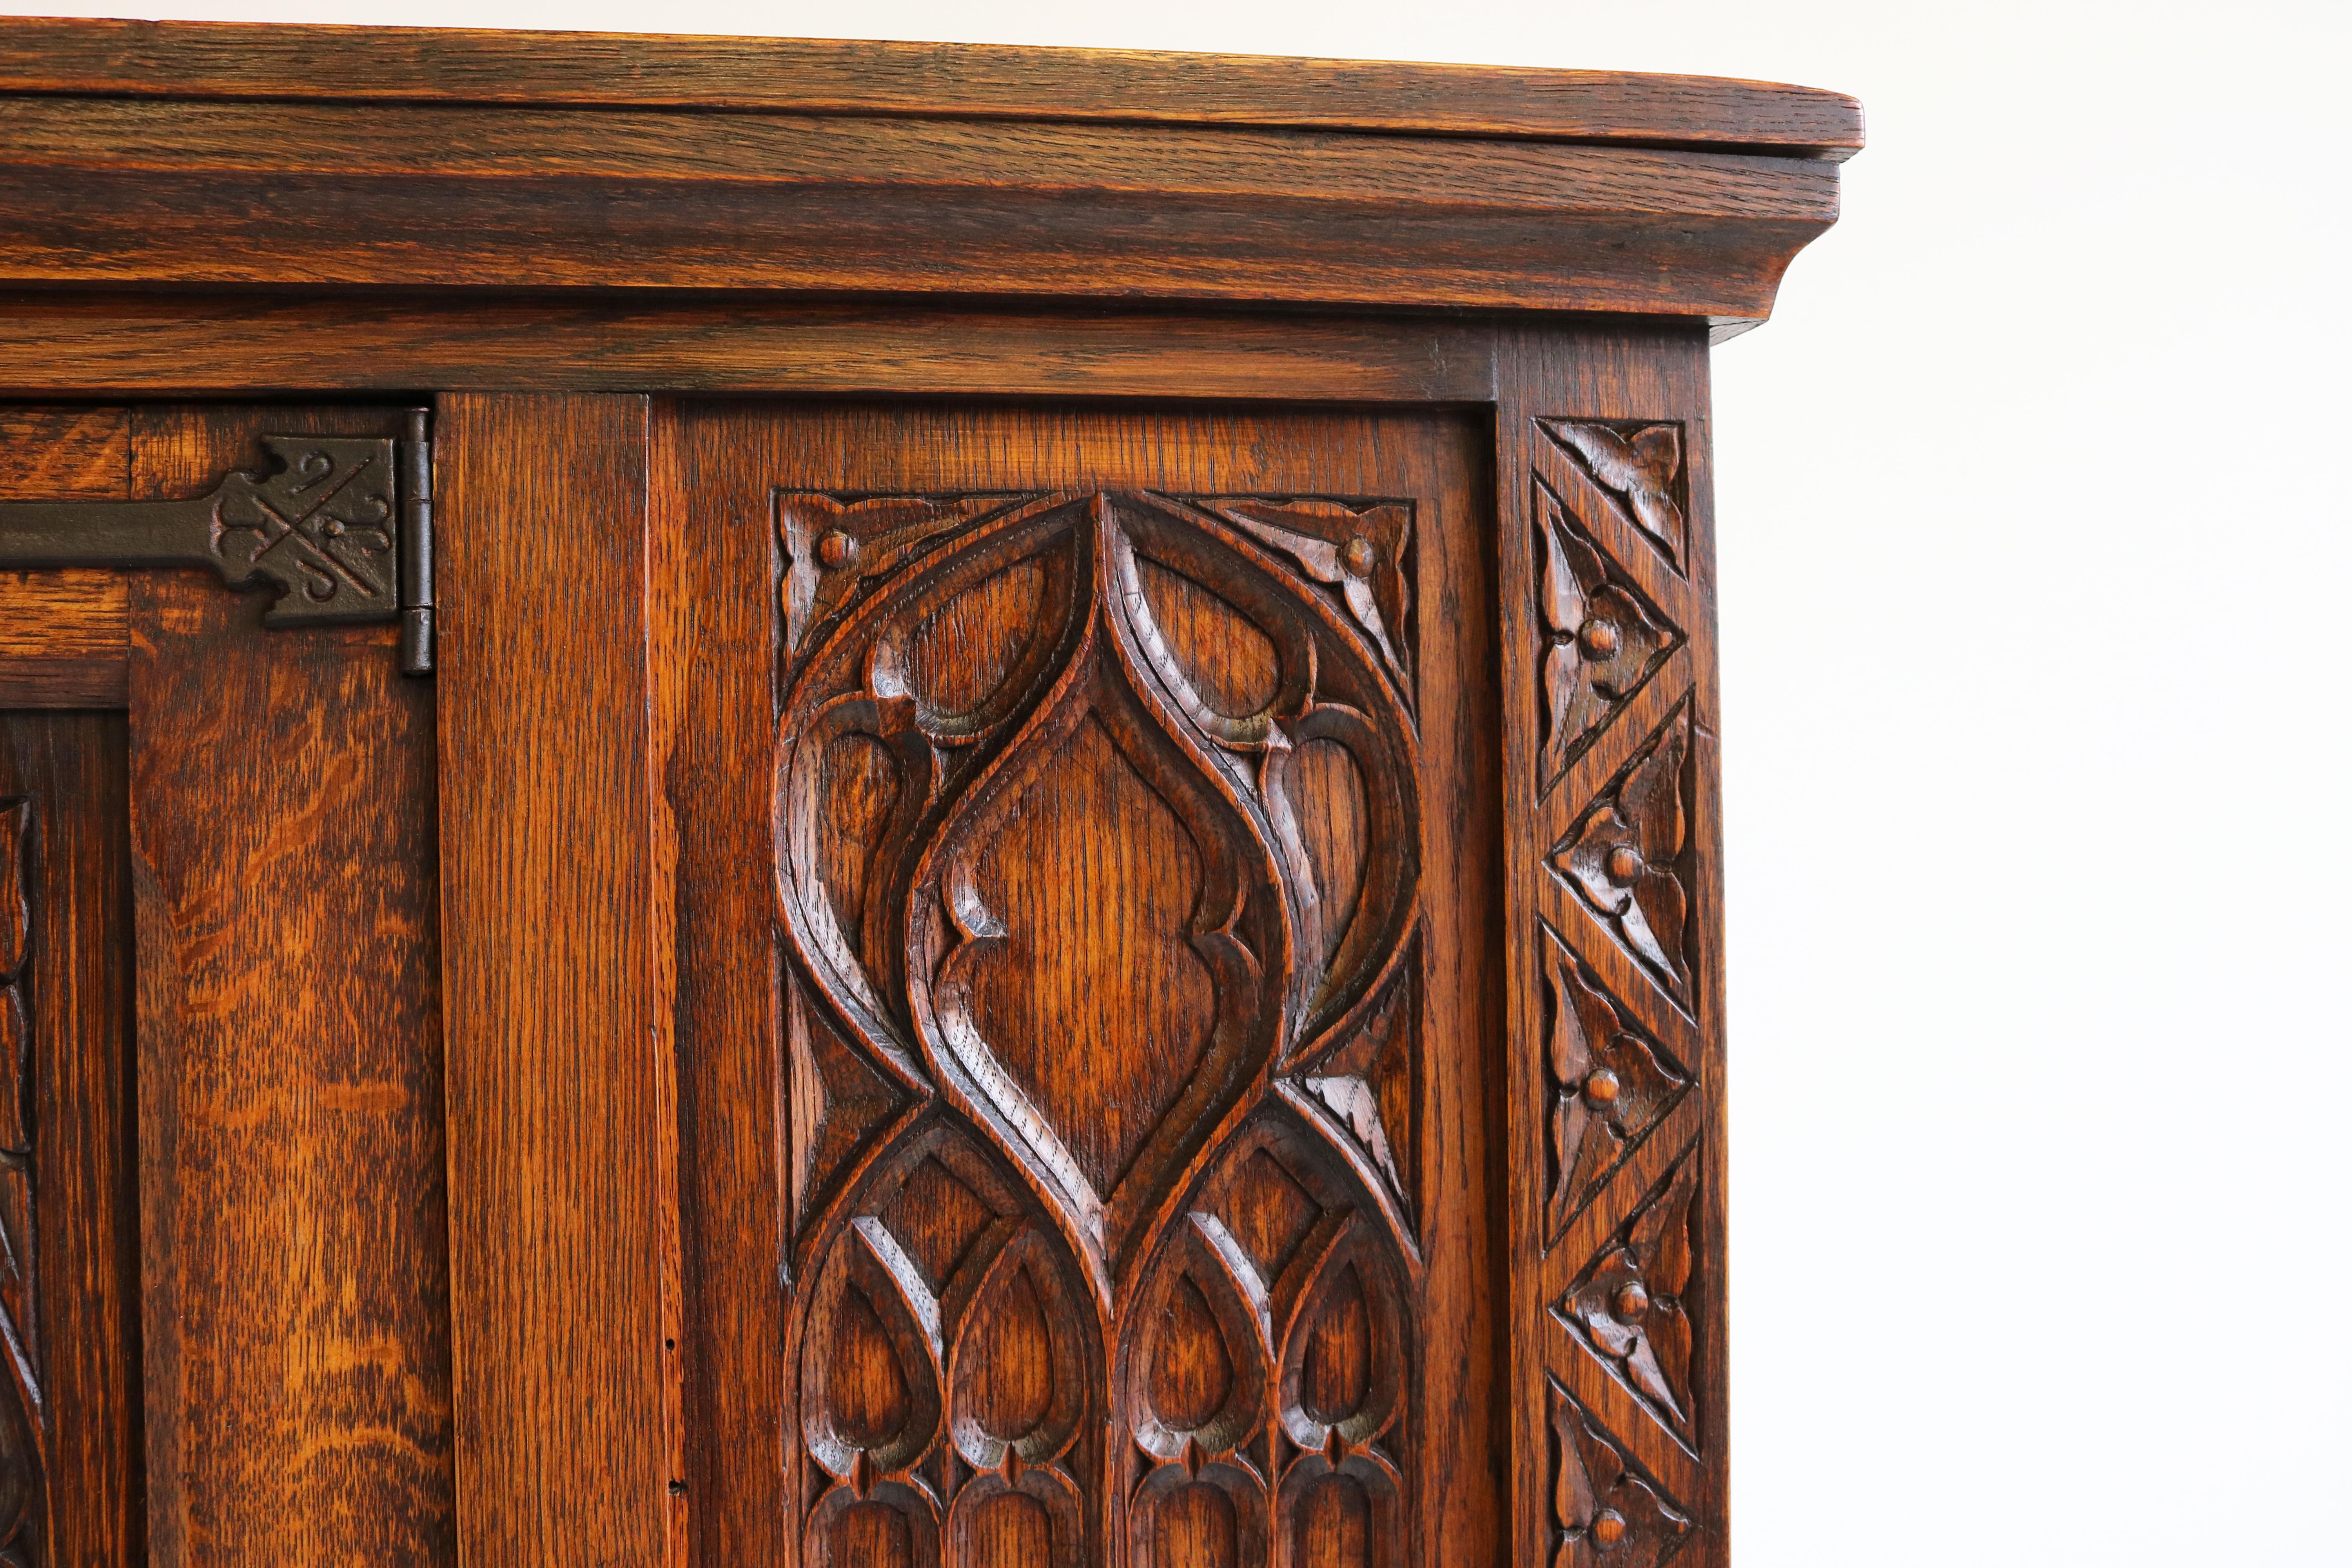 Dutch Antique Gothic Revival Oak Carved Dry Bar / Drinks Cabinet Church Windows Arches For Sale